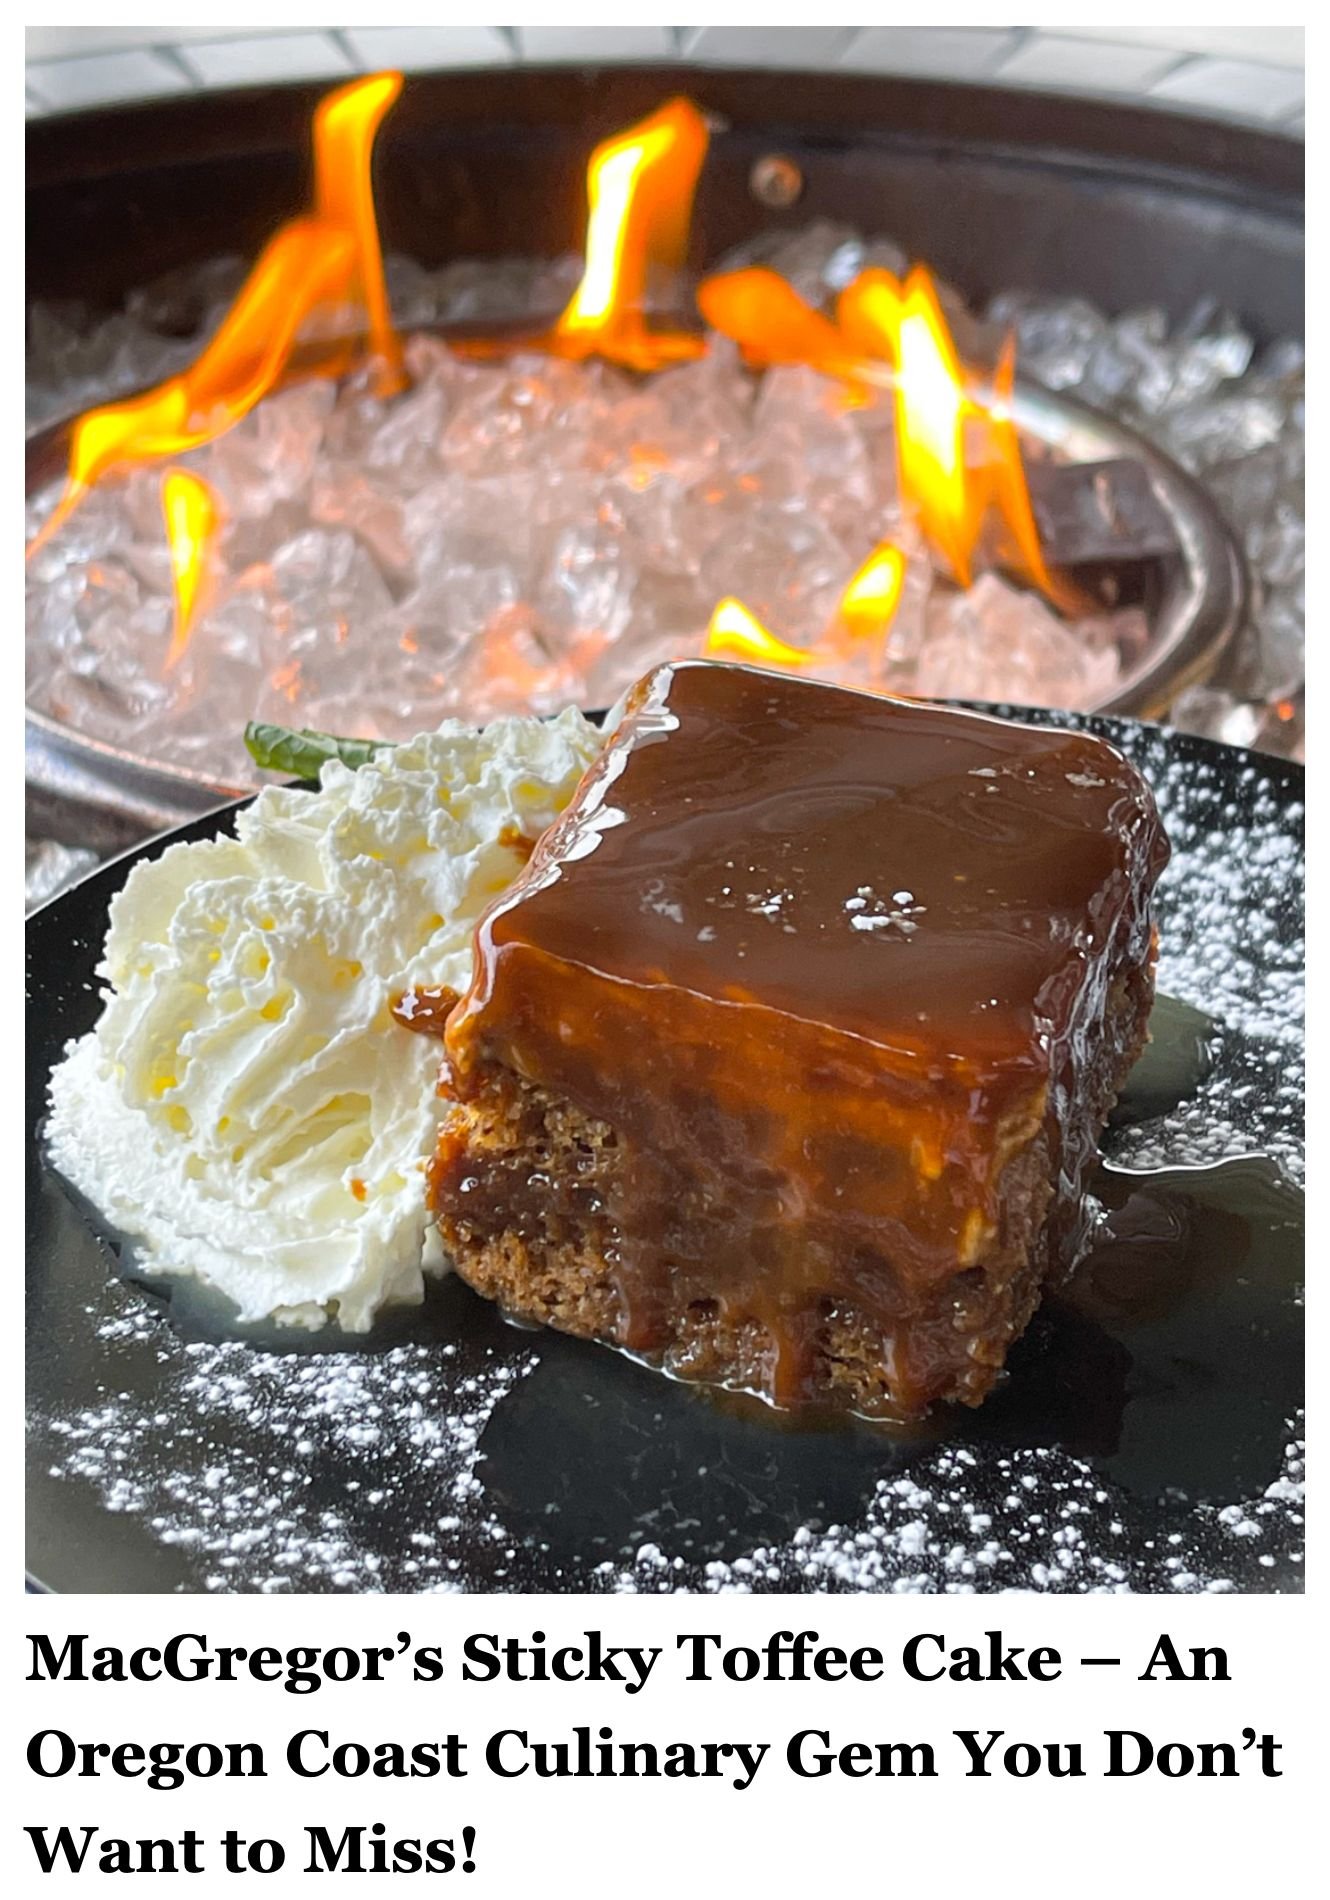 MacGregor’s Sticky Toffee Cake – An Oregon Coast Culinary Gem You Don’t Want to Miss by Steven Shomler